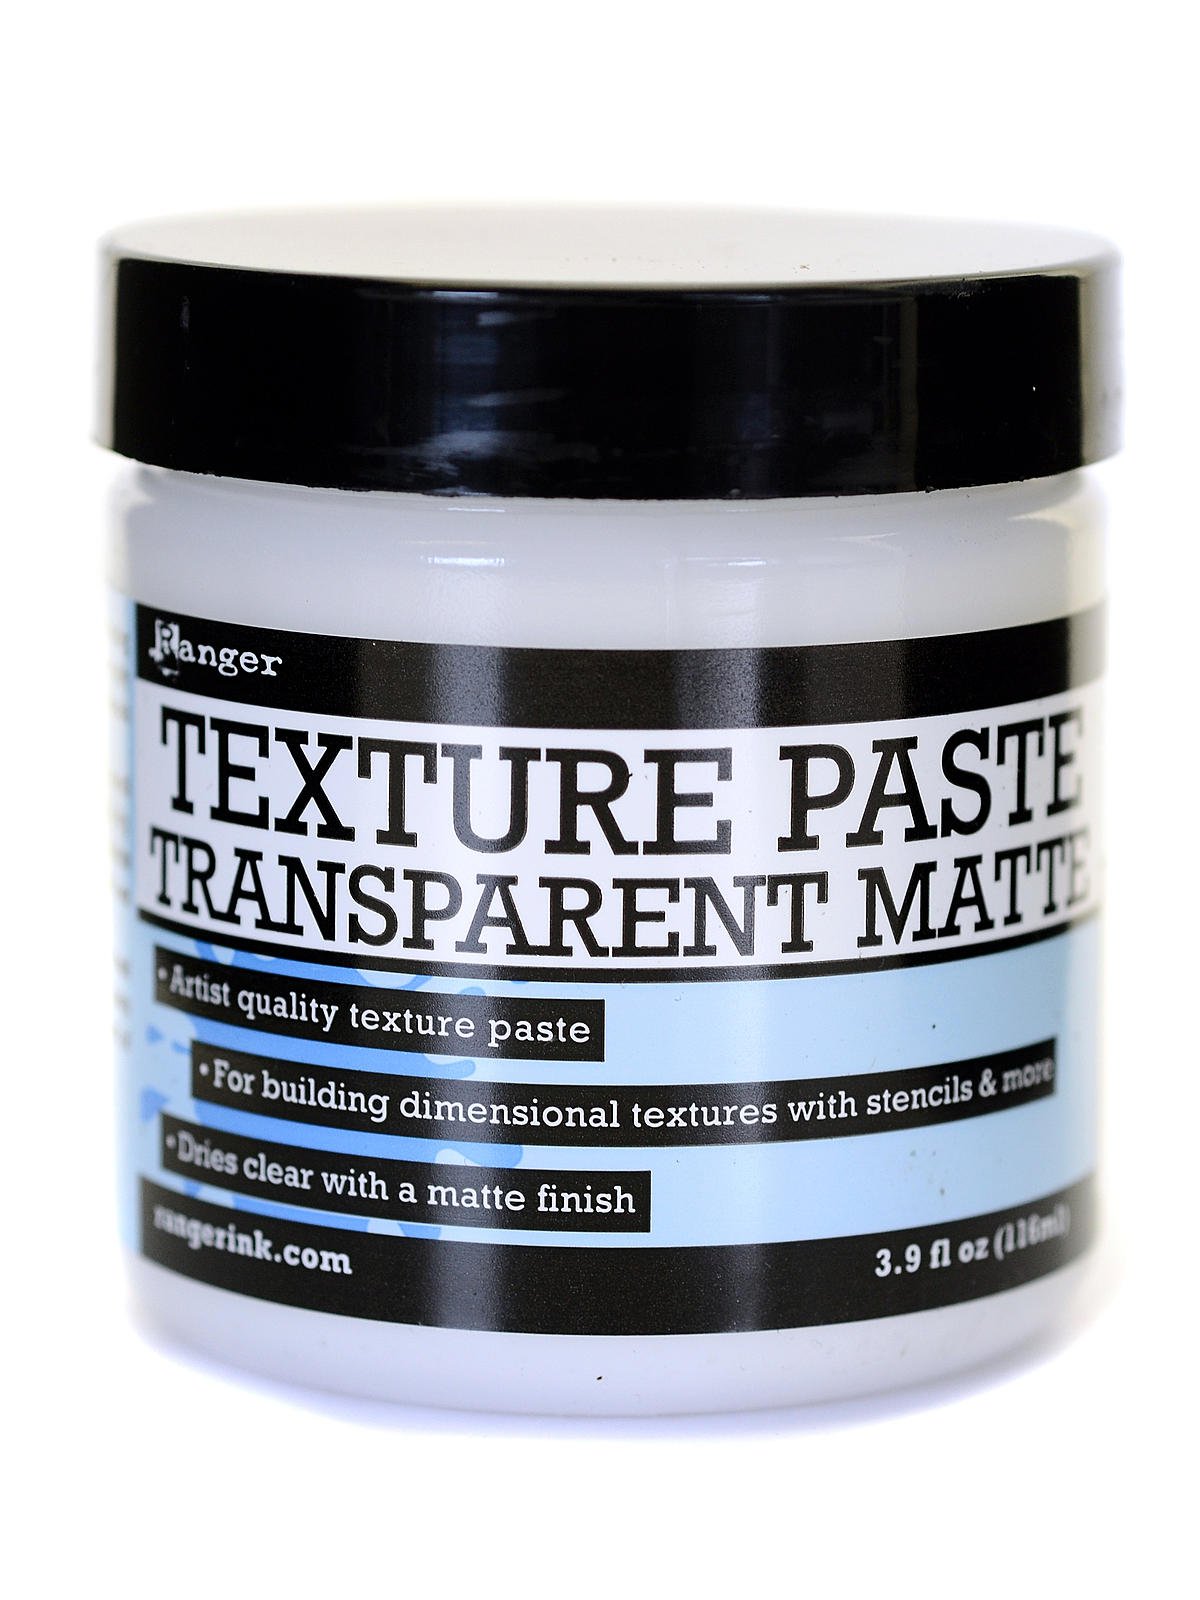 Acrylic Modeling Paste: Add Texture and Dimension to Your Artwork